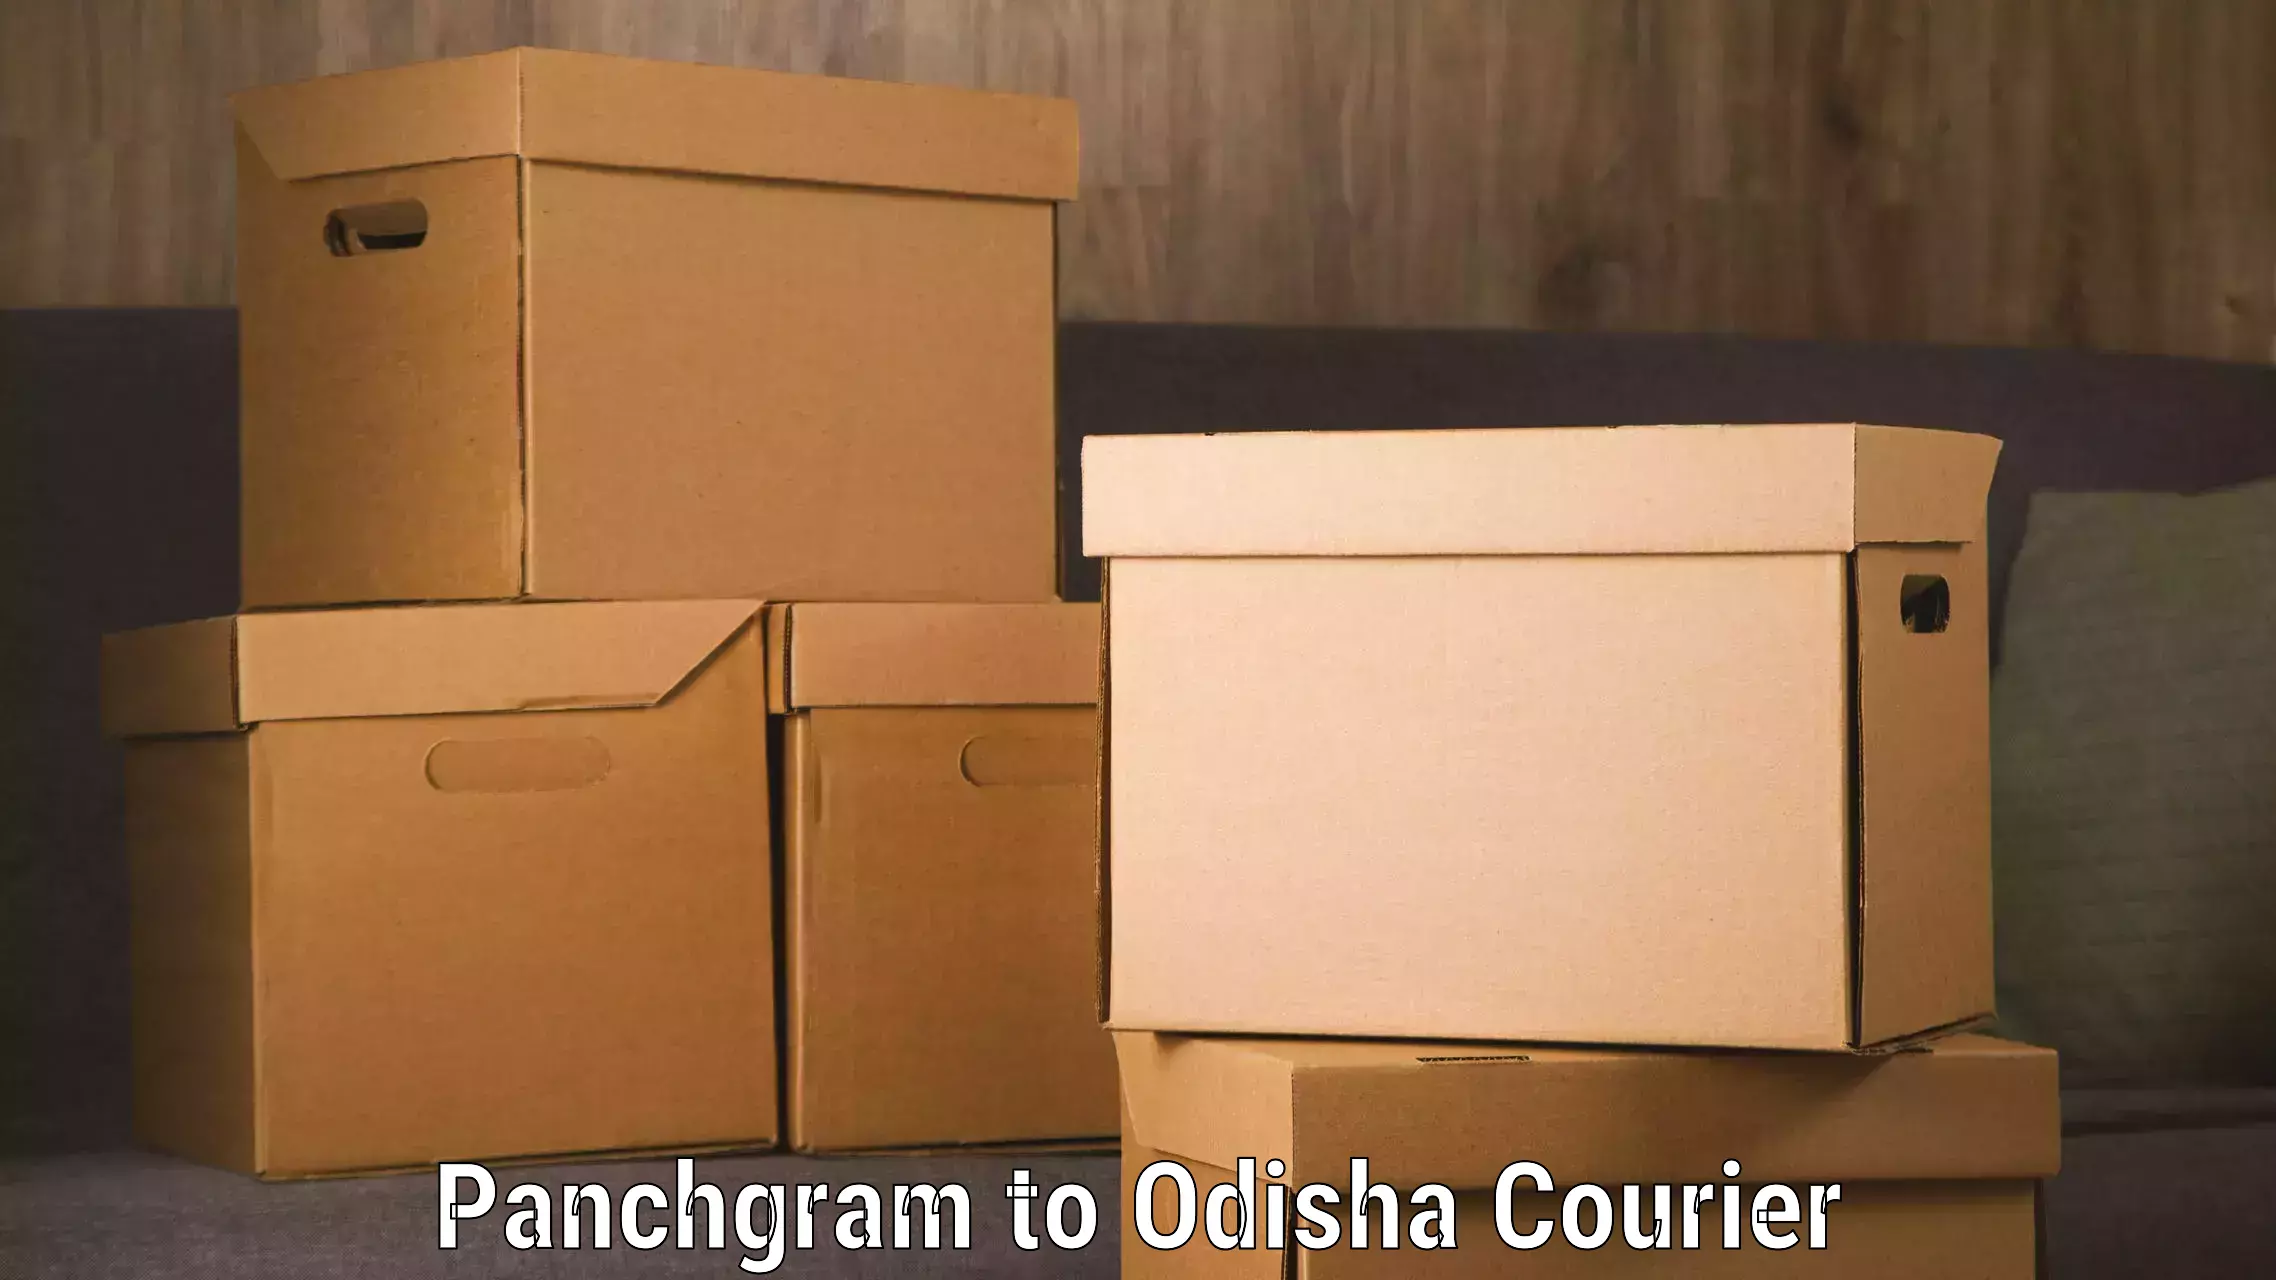 Luggage transport consultancy Panchgram to Odisha